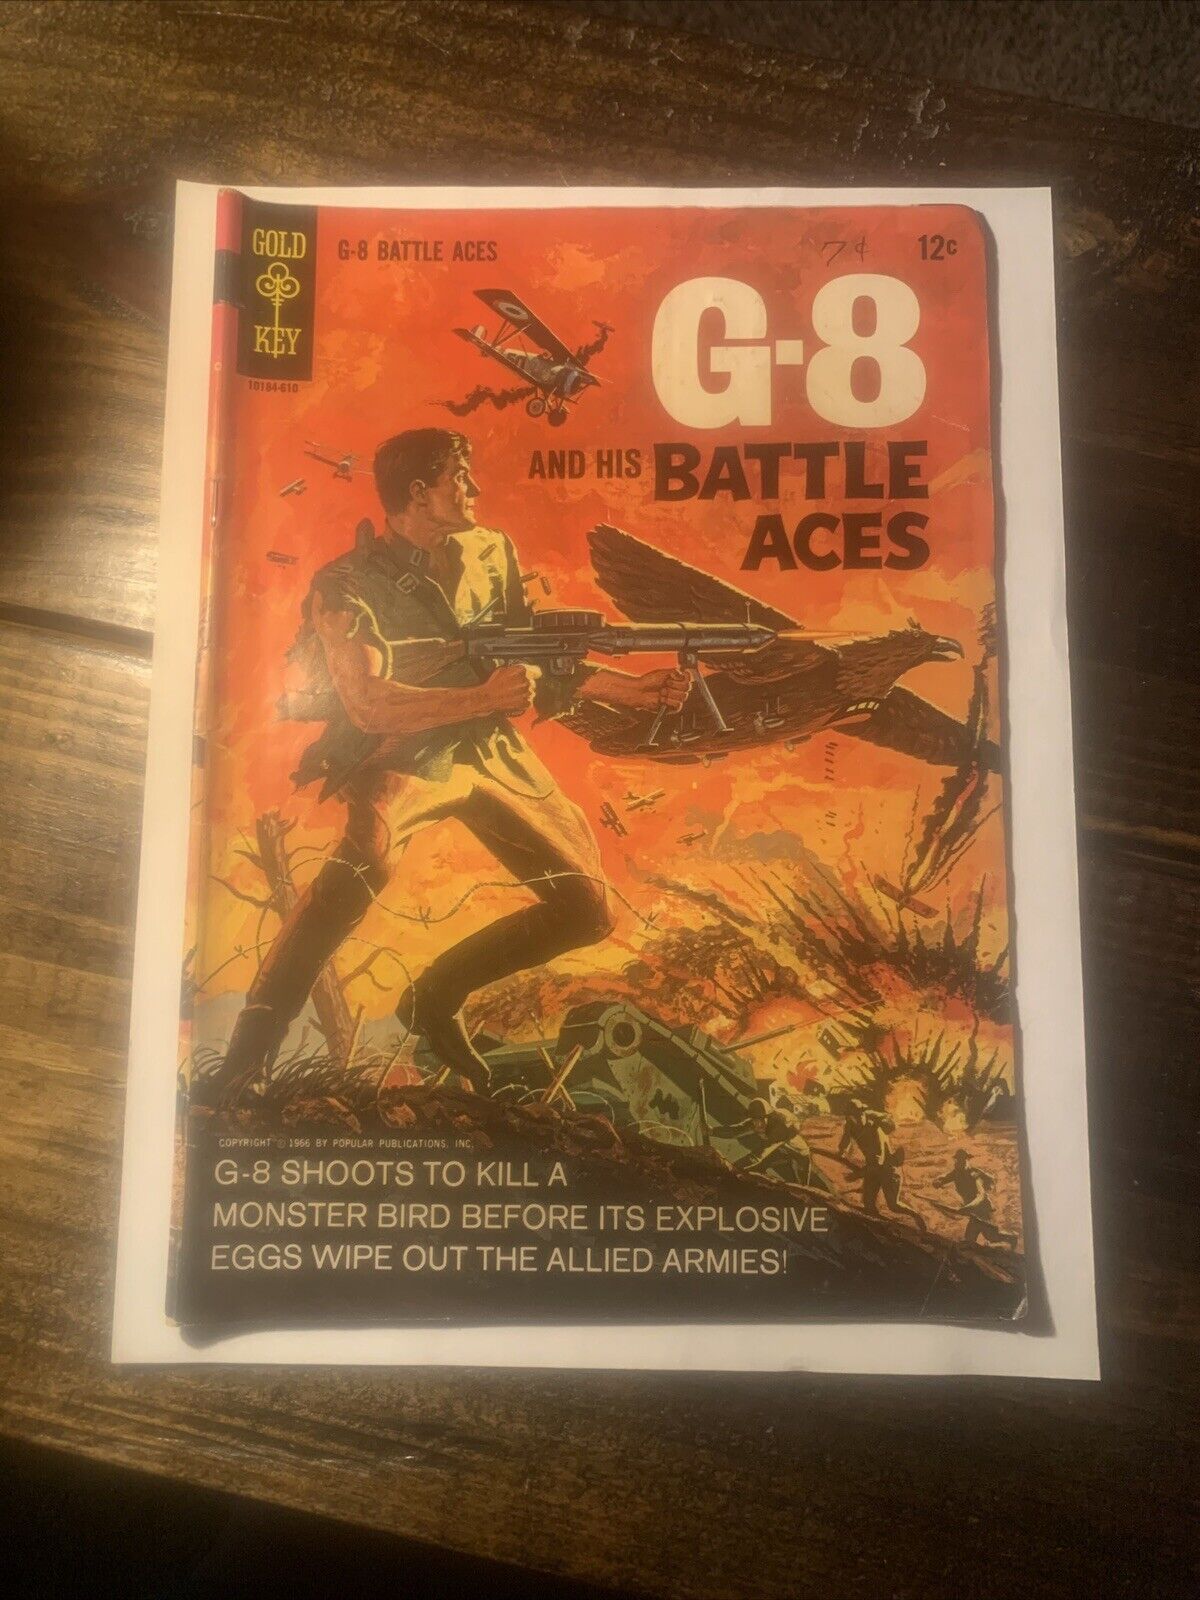 G-8 AND HIS BATTLE ACES #1 Gold Key 1966 pulp hero